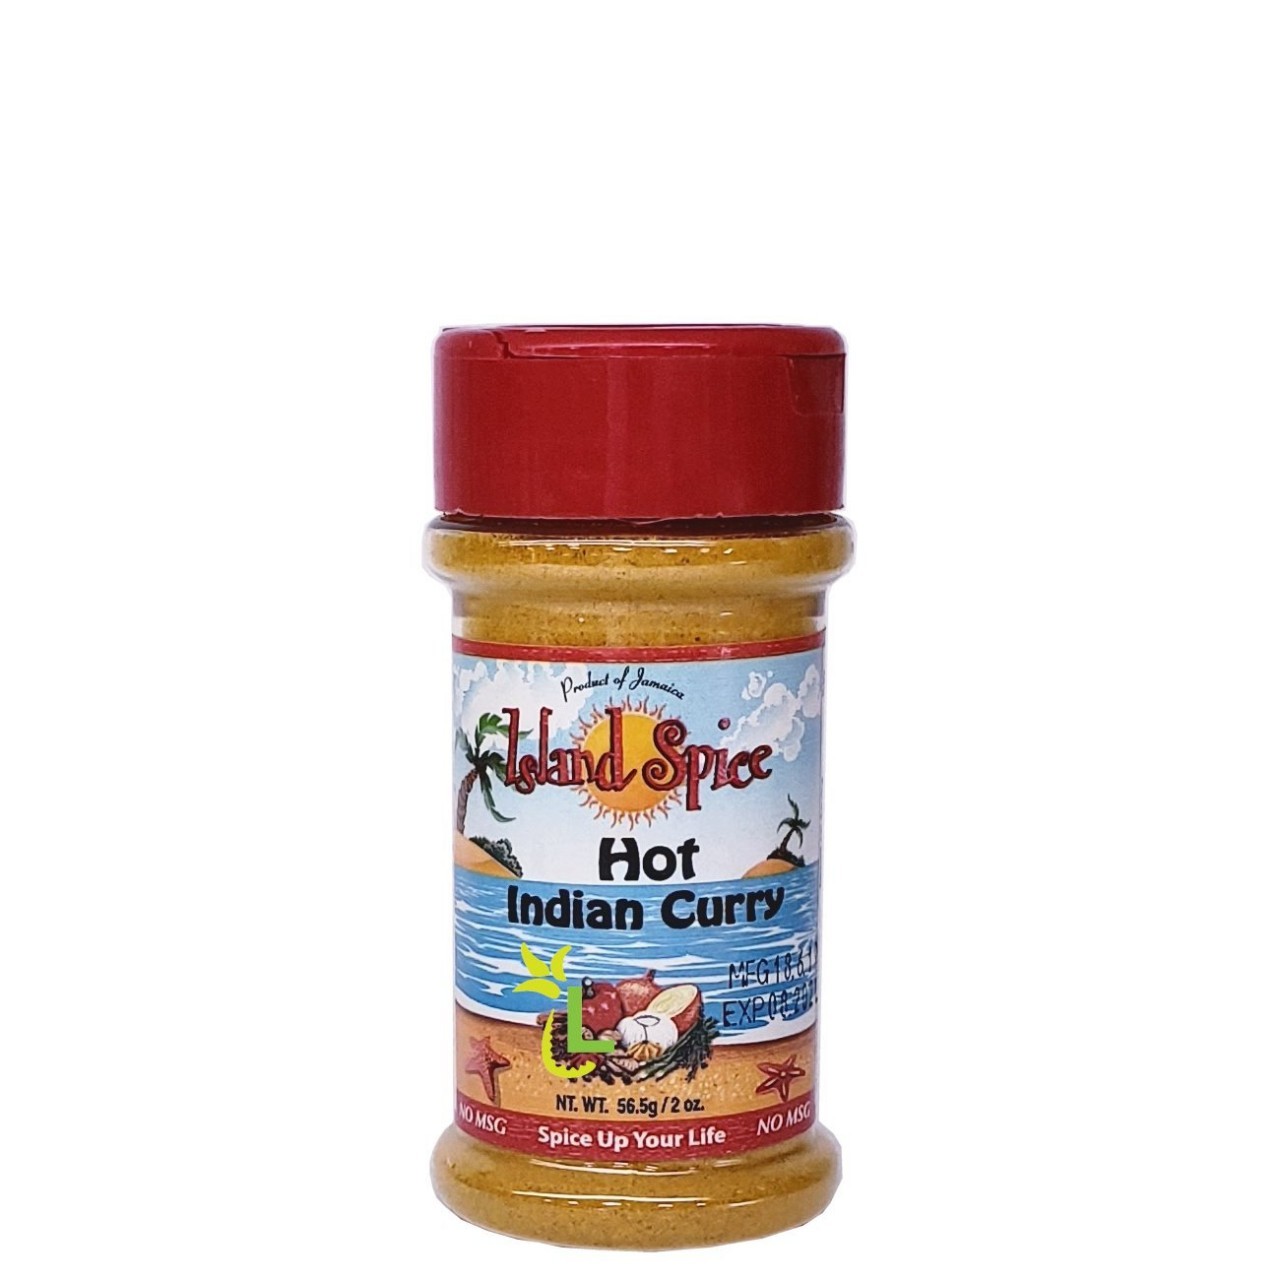 ISLAND SPICE HOT INDIAN CURRY 2oz